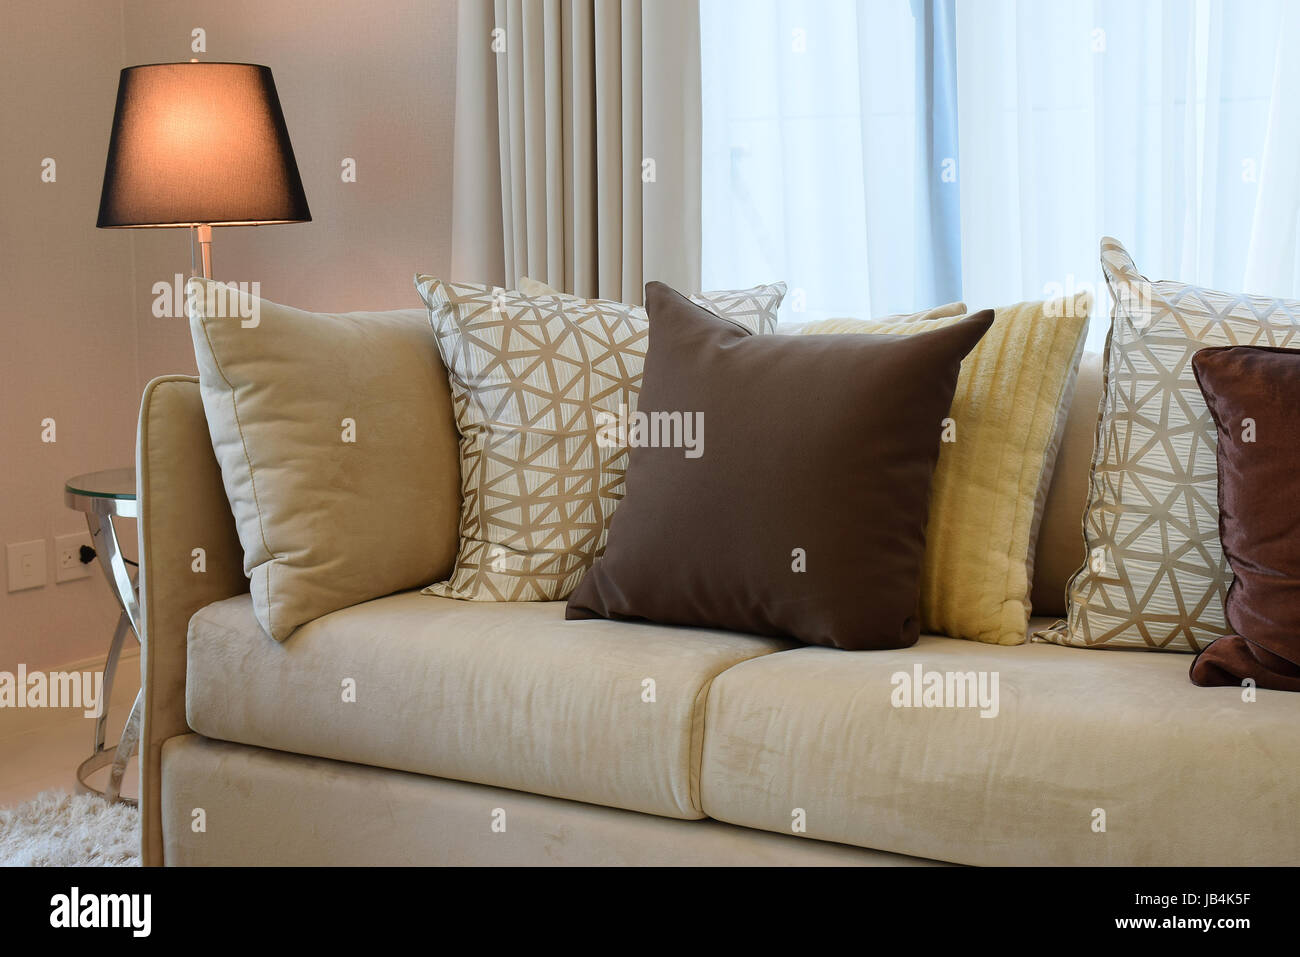 Sturdy brown tweed sofa with grey patterned pillows and lamp Stock Photo